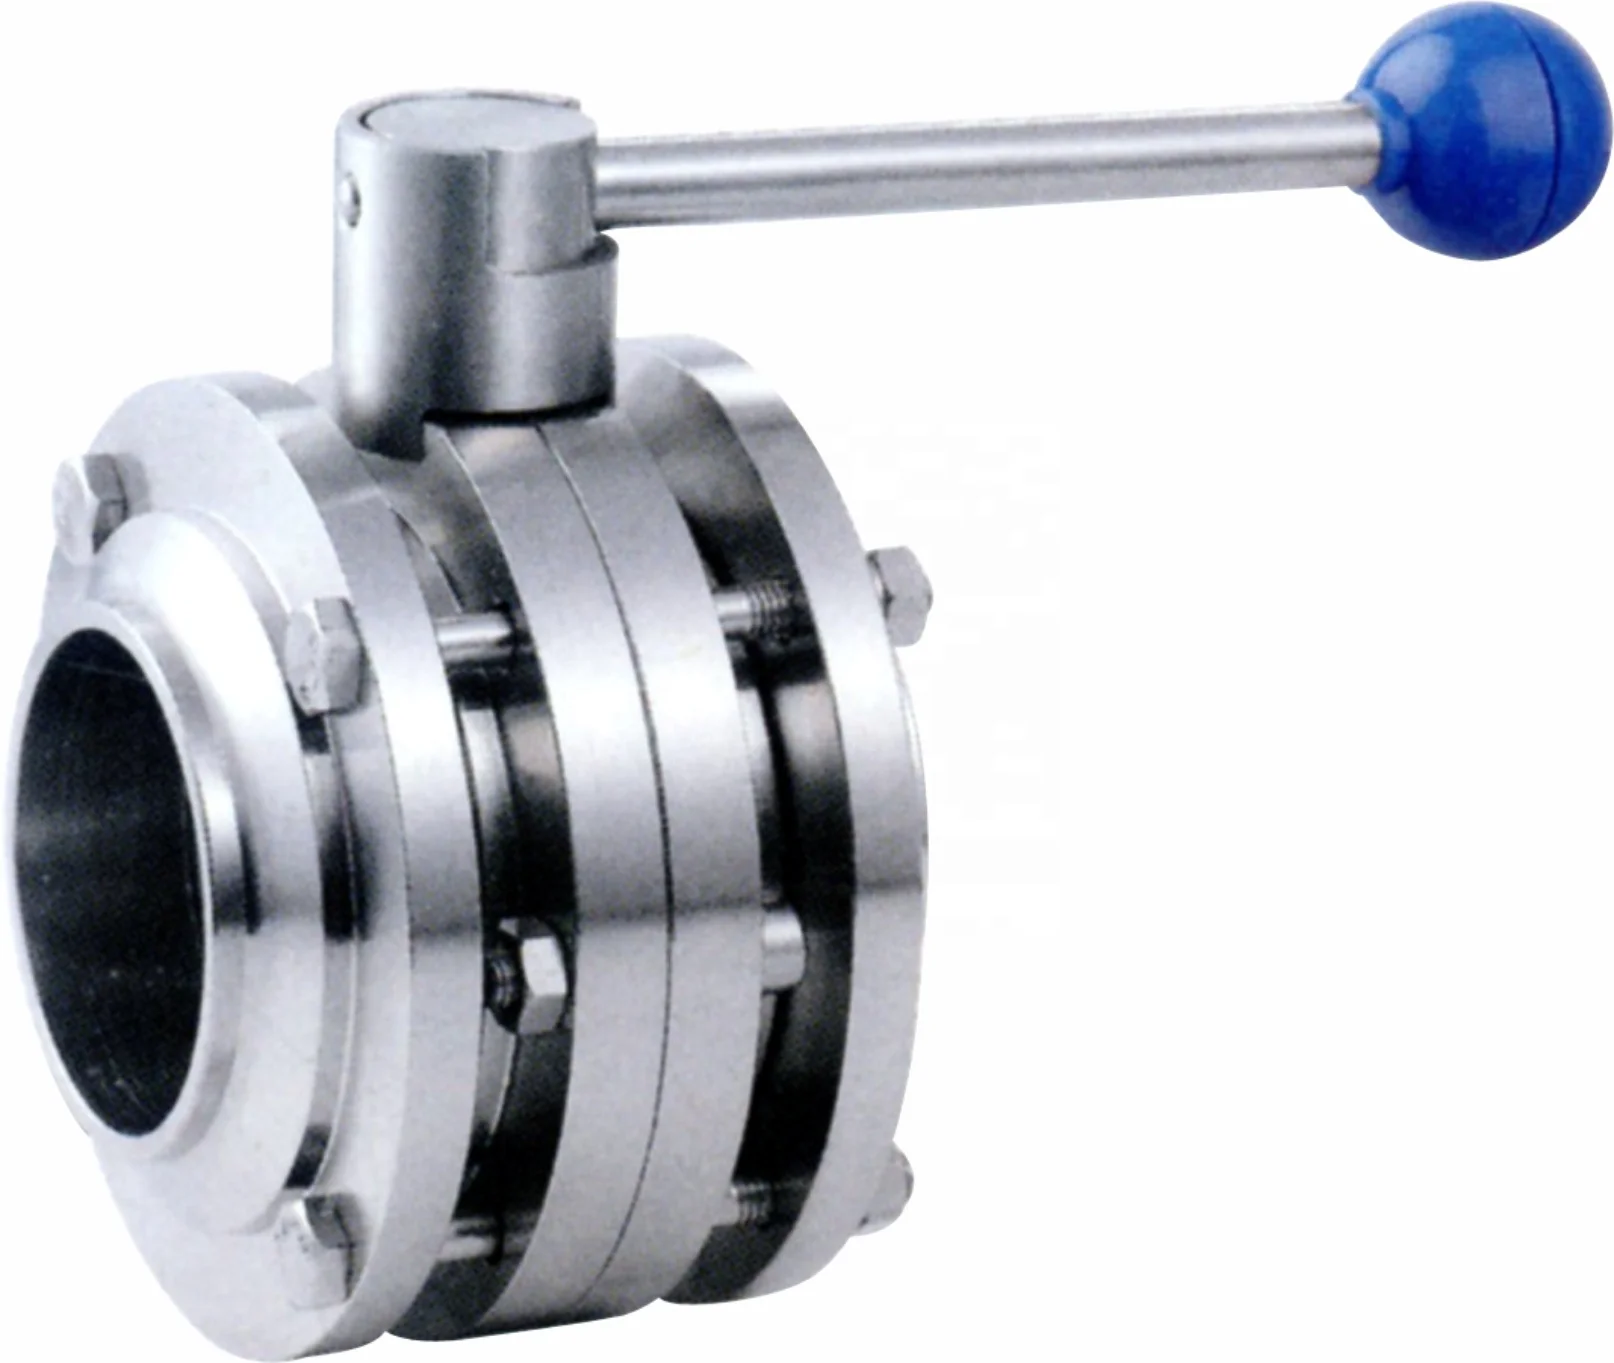 COVNA Stainless Steel 304 Tri Clamp Clover Sanitary Butterfly Valve with Pull Handle